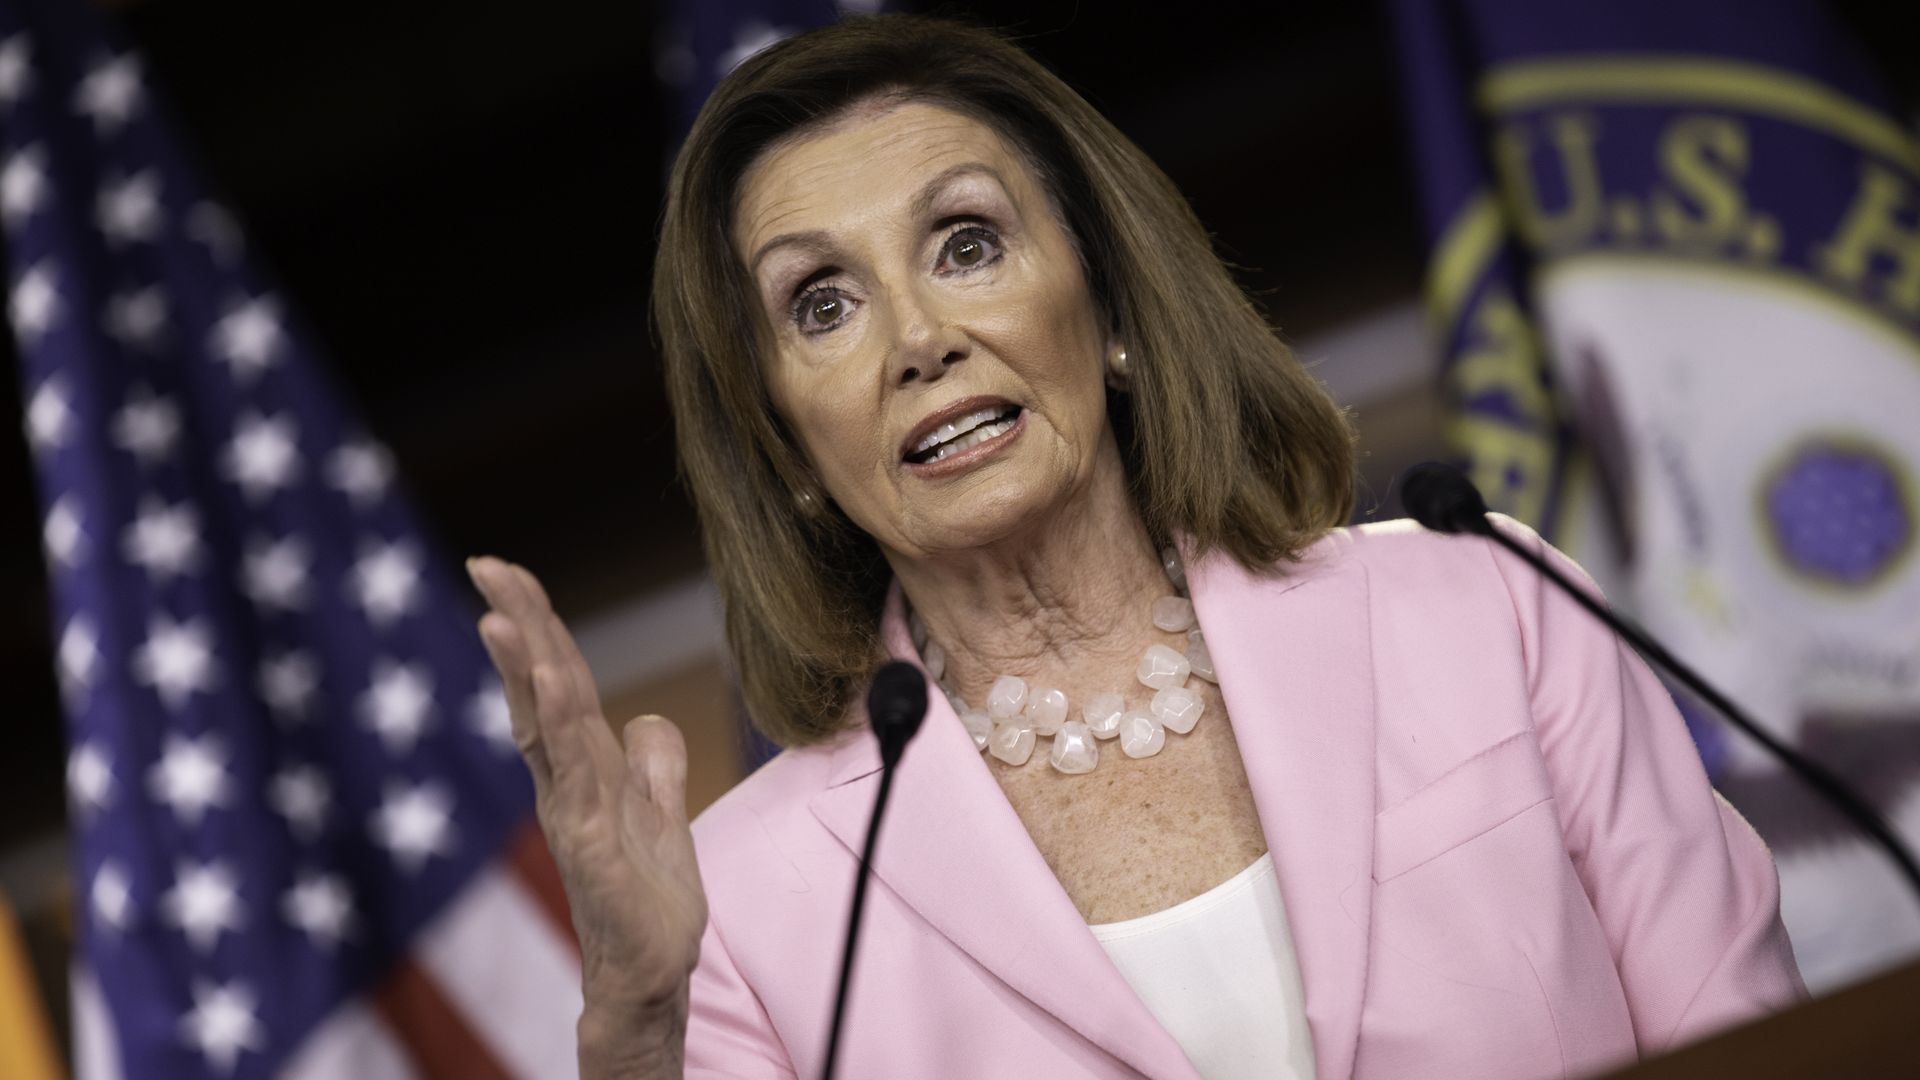 Nancy Pelosi speaks while gesturing with her right hand